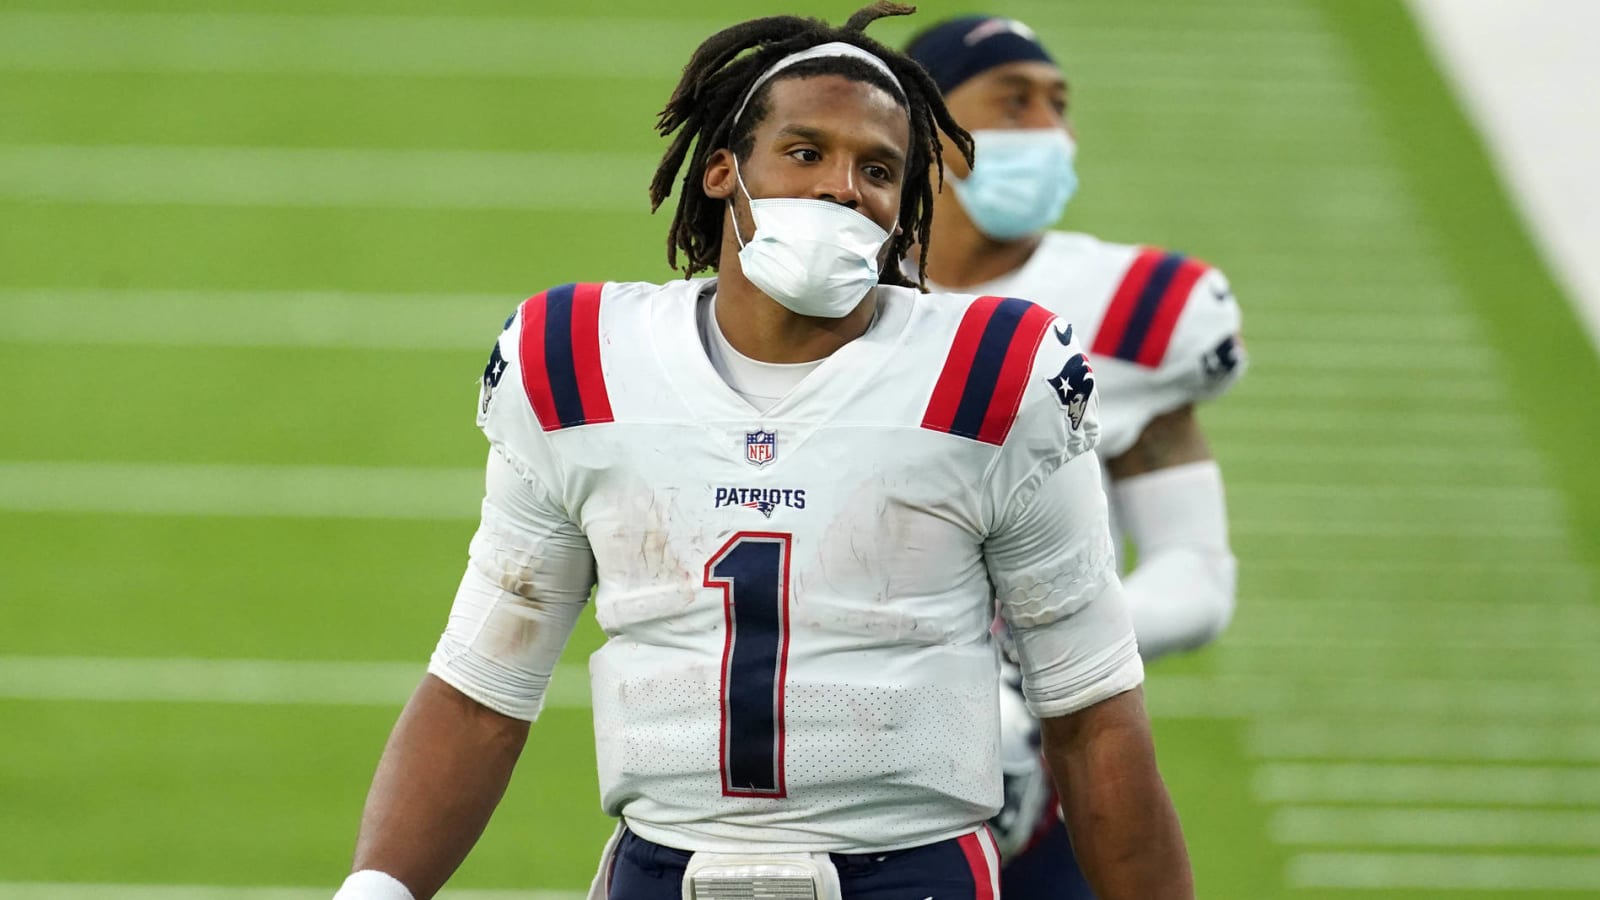 Pats not interested in bringing Newton back in 2021?